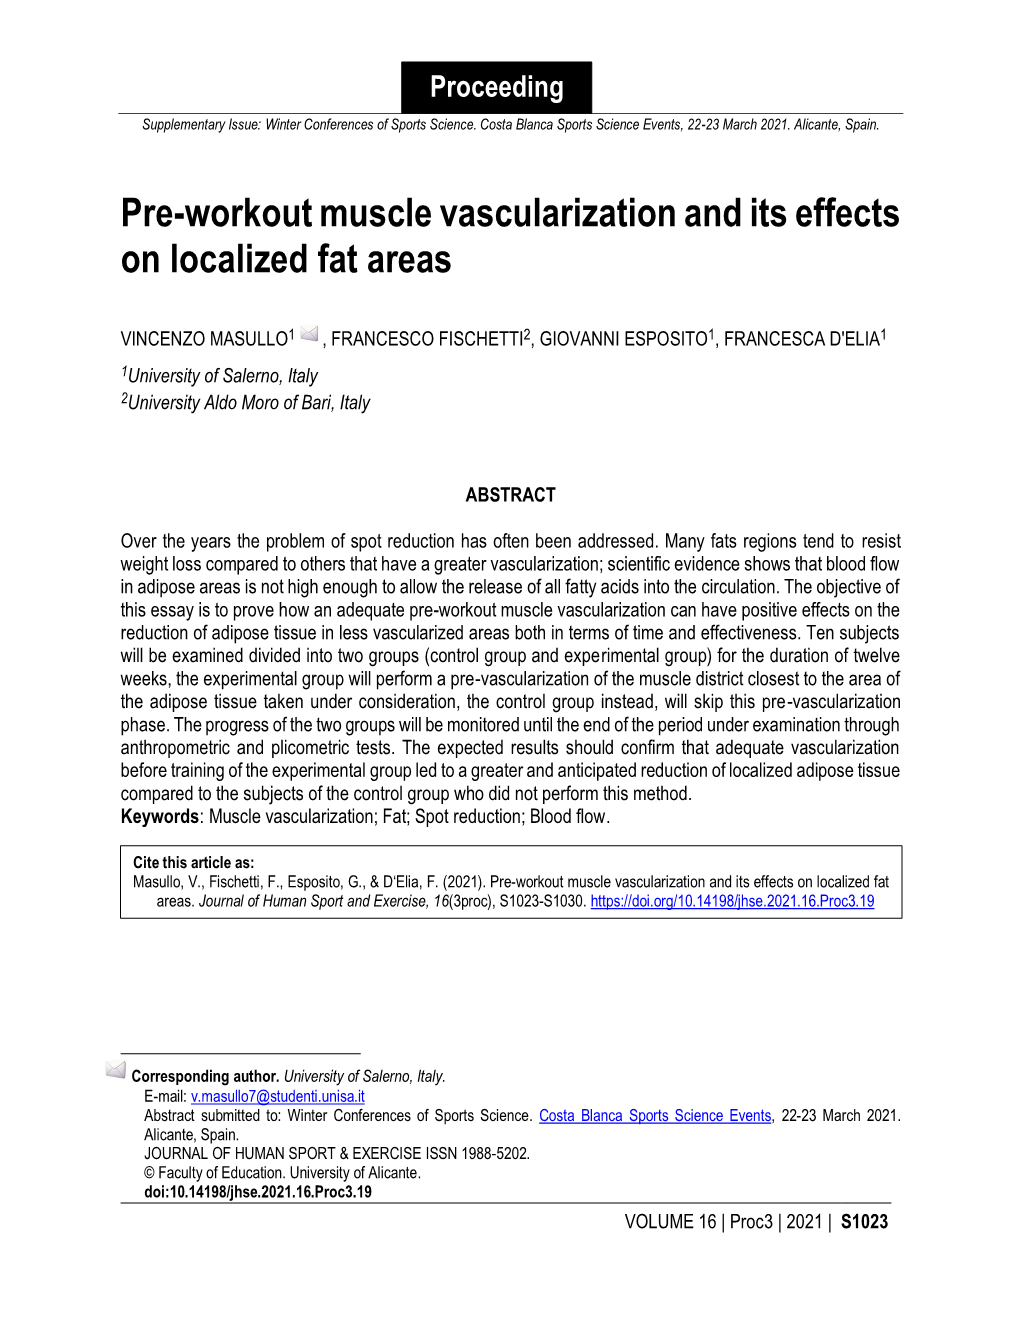 Pre-Workout Muscle Vascularization and Its Effects on Localized Fat Areas